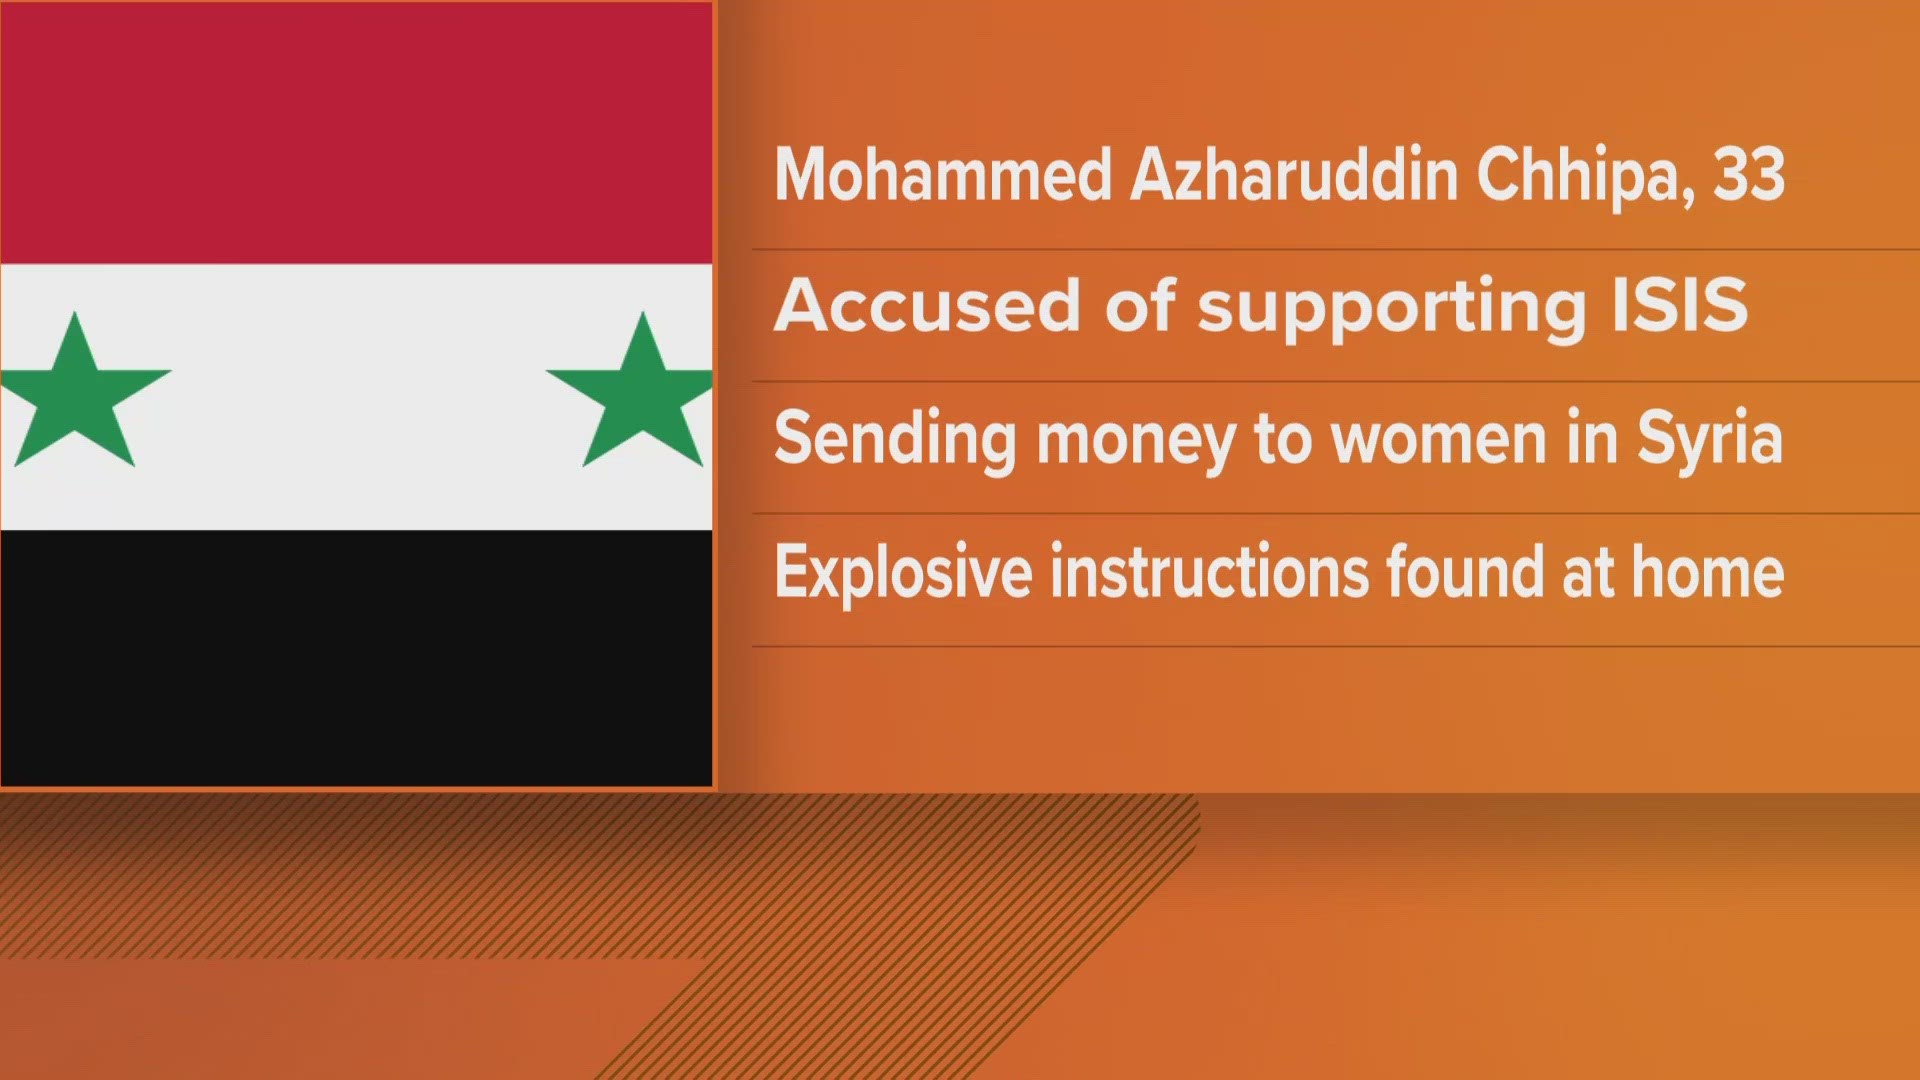 A Northern Virginia man is charged with providing support to some female ISIS members in Syria.